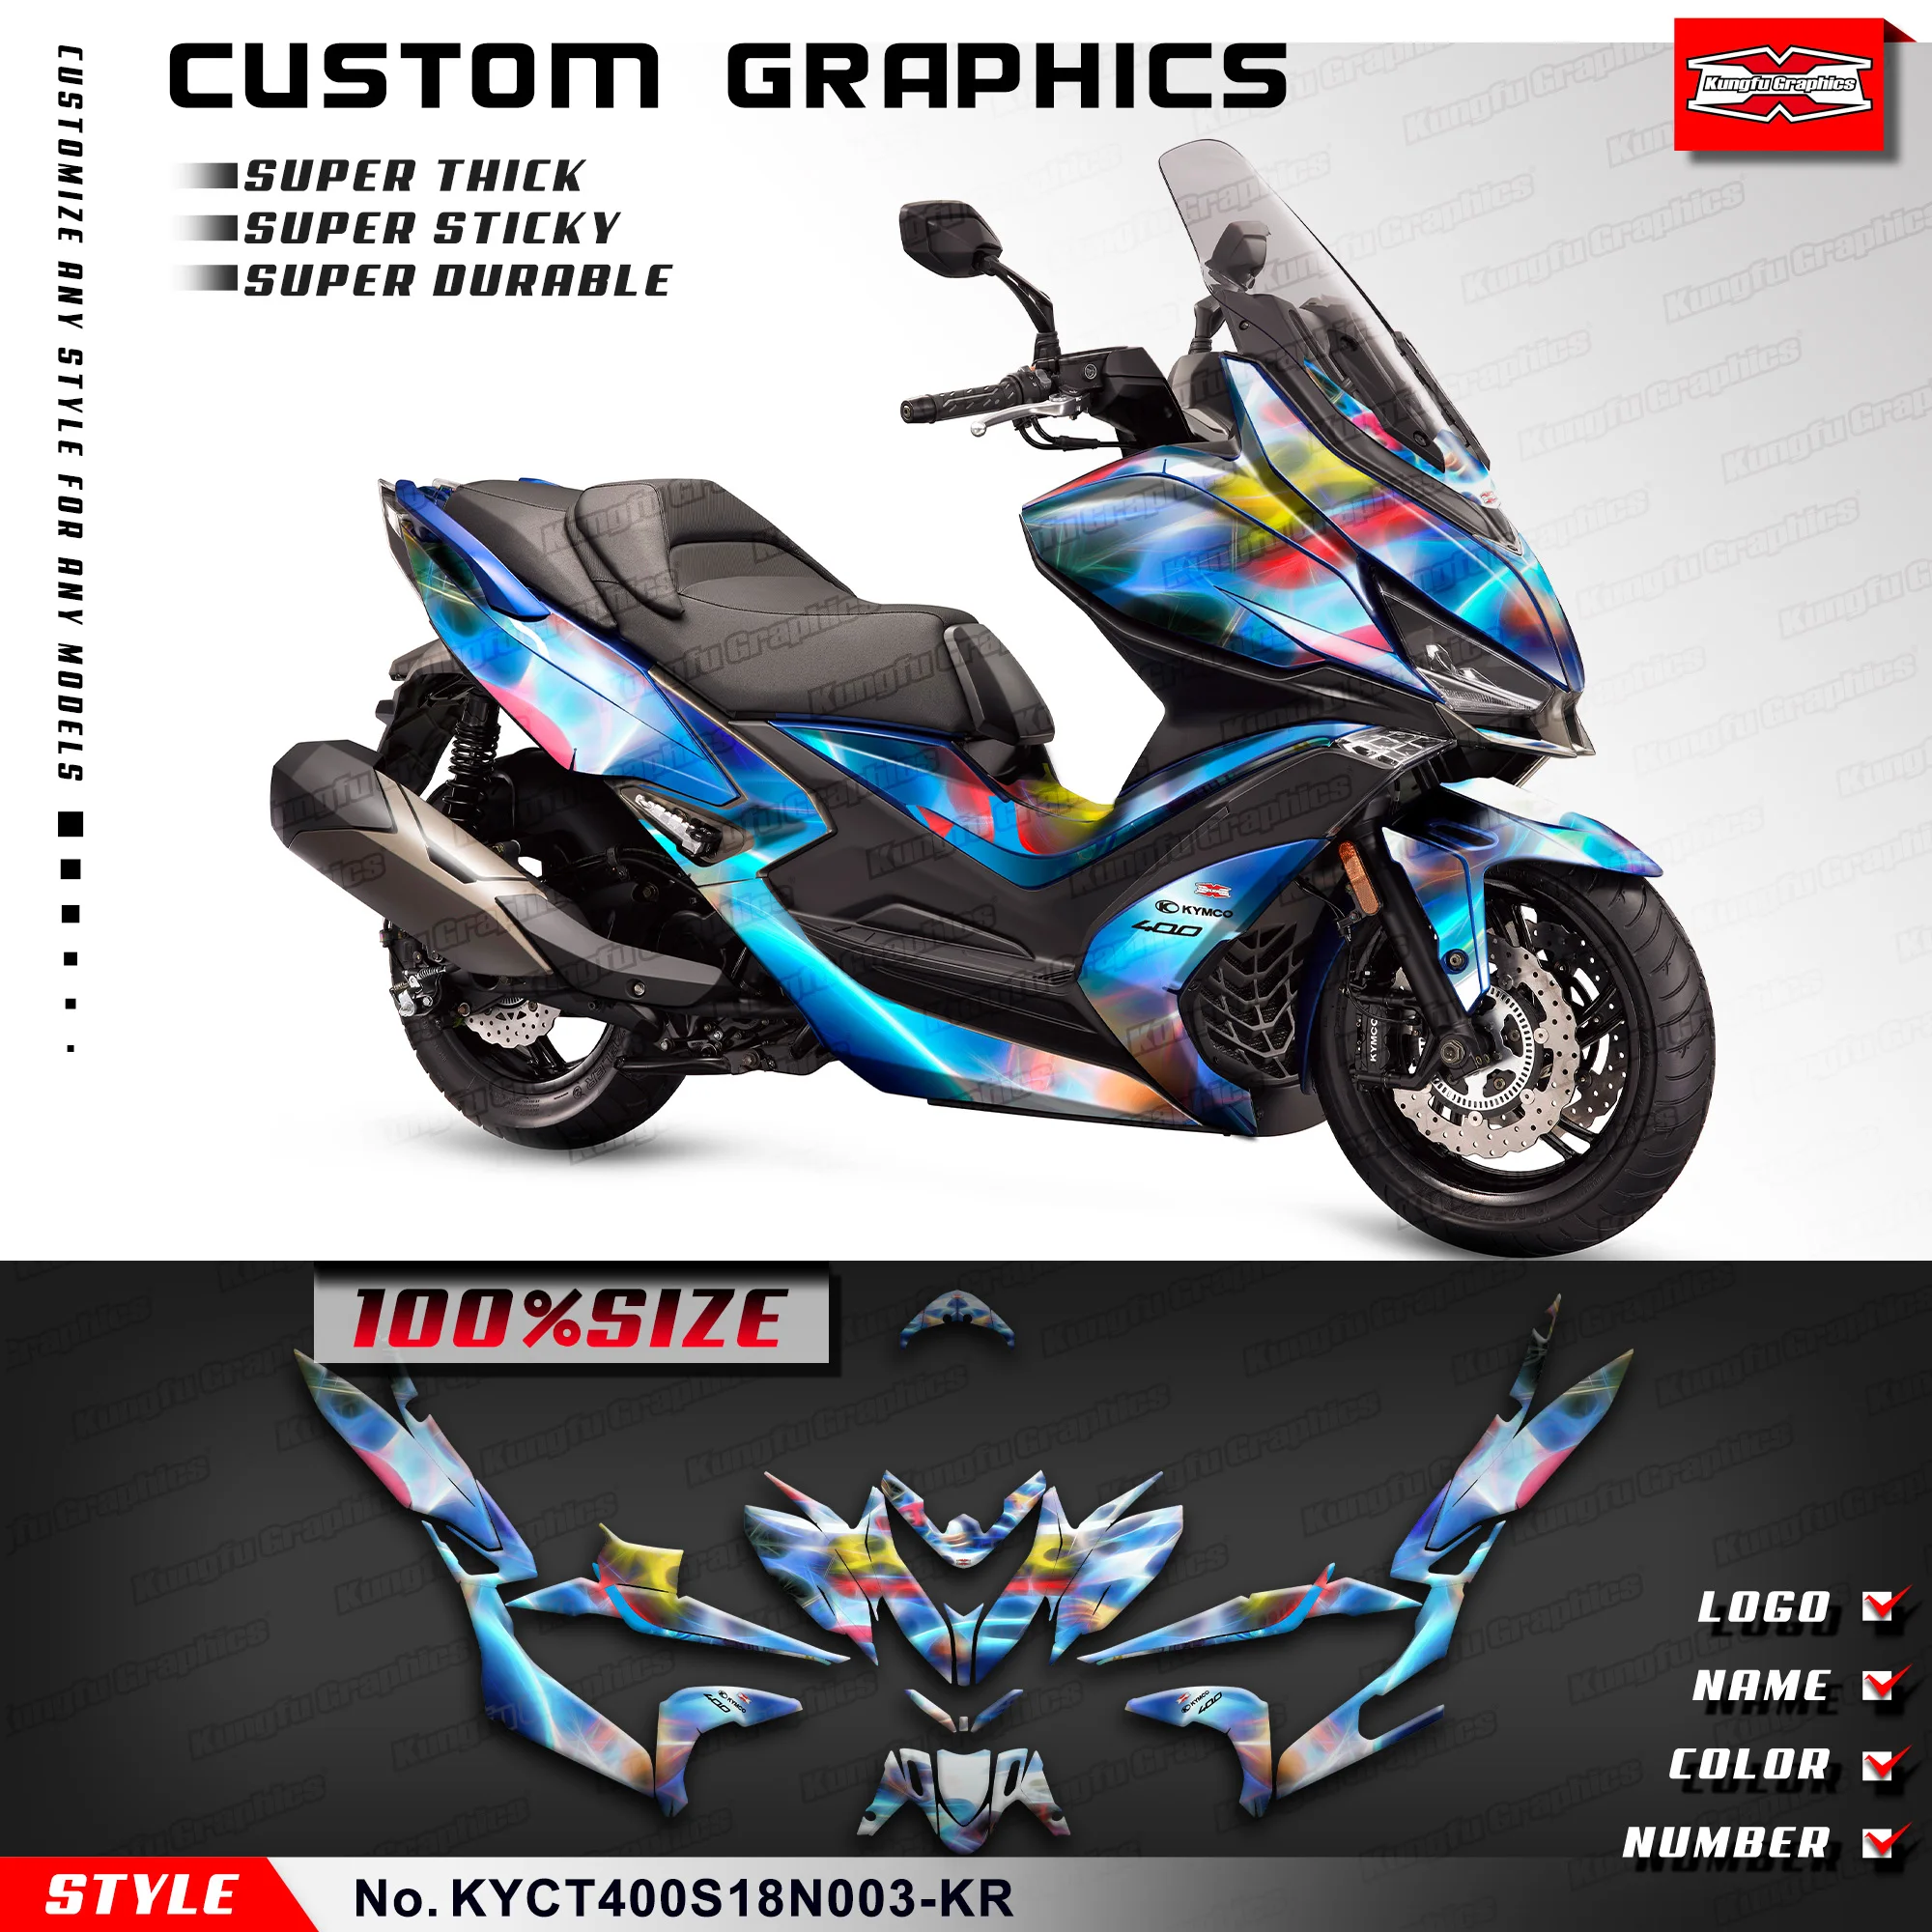 

KUNGFU GRAPHICS Motorcycle Graphics Stickers Complete Decal Kit for KYMCO XCITING S 400 2018 2019 2020, KYCT400S18N003-KR